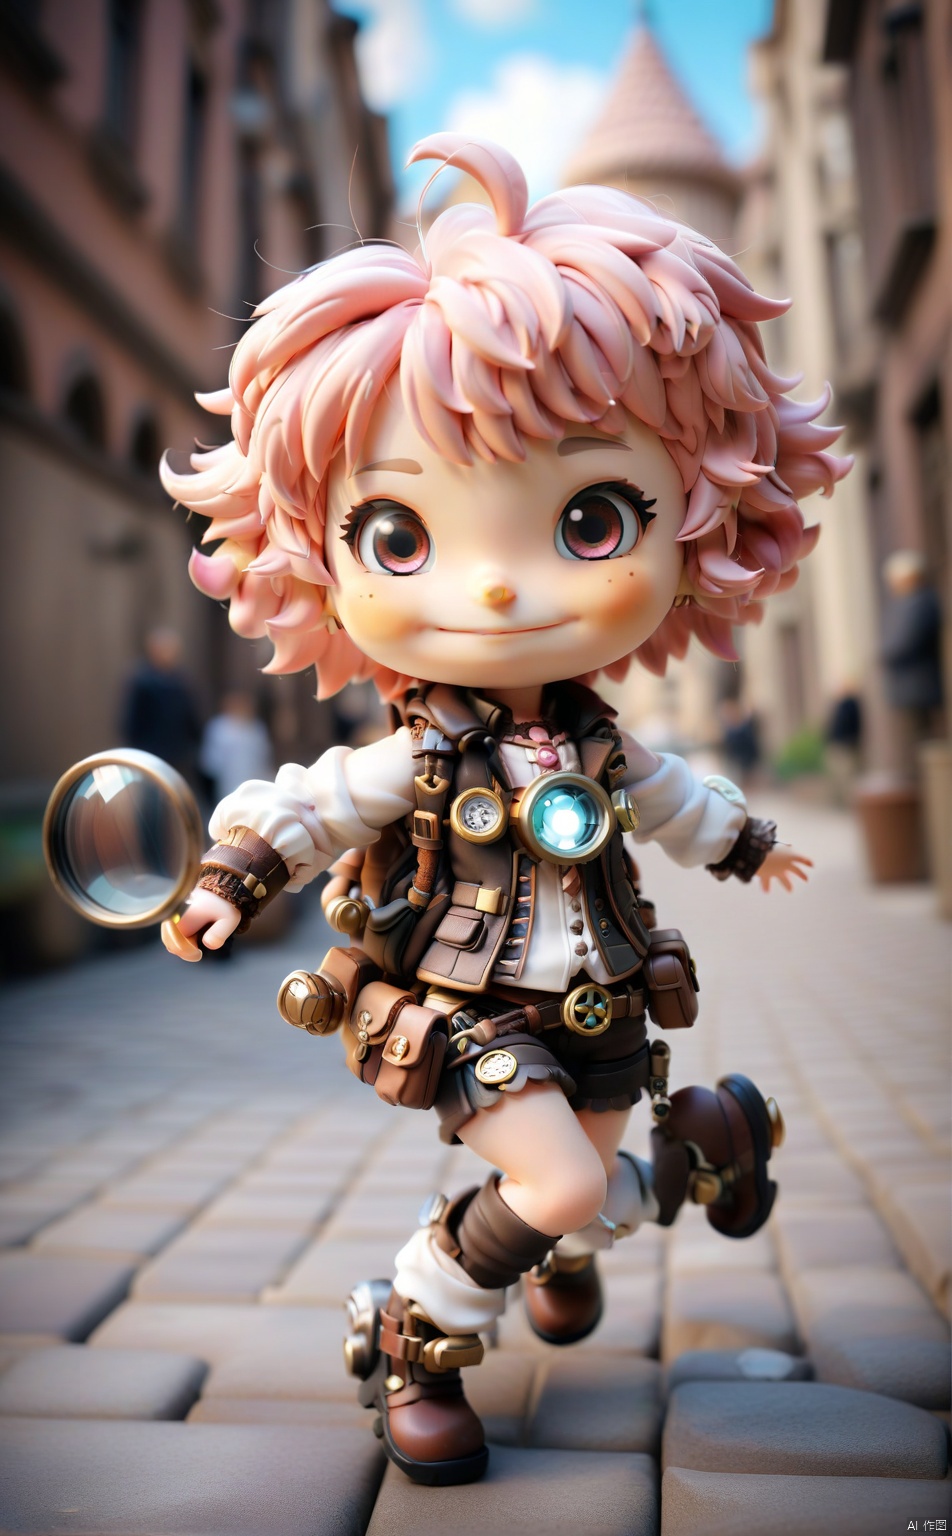  Masterpiece, Best Quality, High Resolution, PVC, Rendering, Chibi, High Resolution, Single Girl, Anya, Anya Forger, Steampunk Costume, Pink Hair, Bob Hair, Smile, Selfish, Chibi, Being Chased Around the City, One Hand Magnifying Glass , Smile, Smile, Self-Justice, Full Body, Chibi, 3D Figure, Toy, Doll, Character Print, Front View, Natural Light, ((Real)) Quality: 1.2)), Dynamic Pose, Cinematic Lighting, 3DIP, Sewing doll